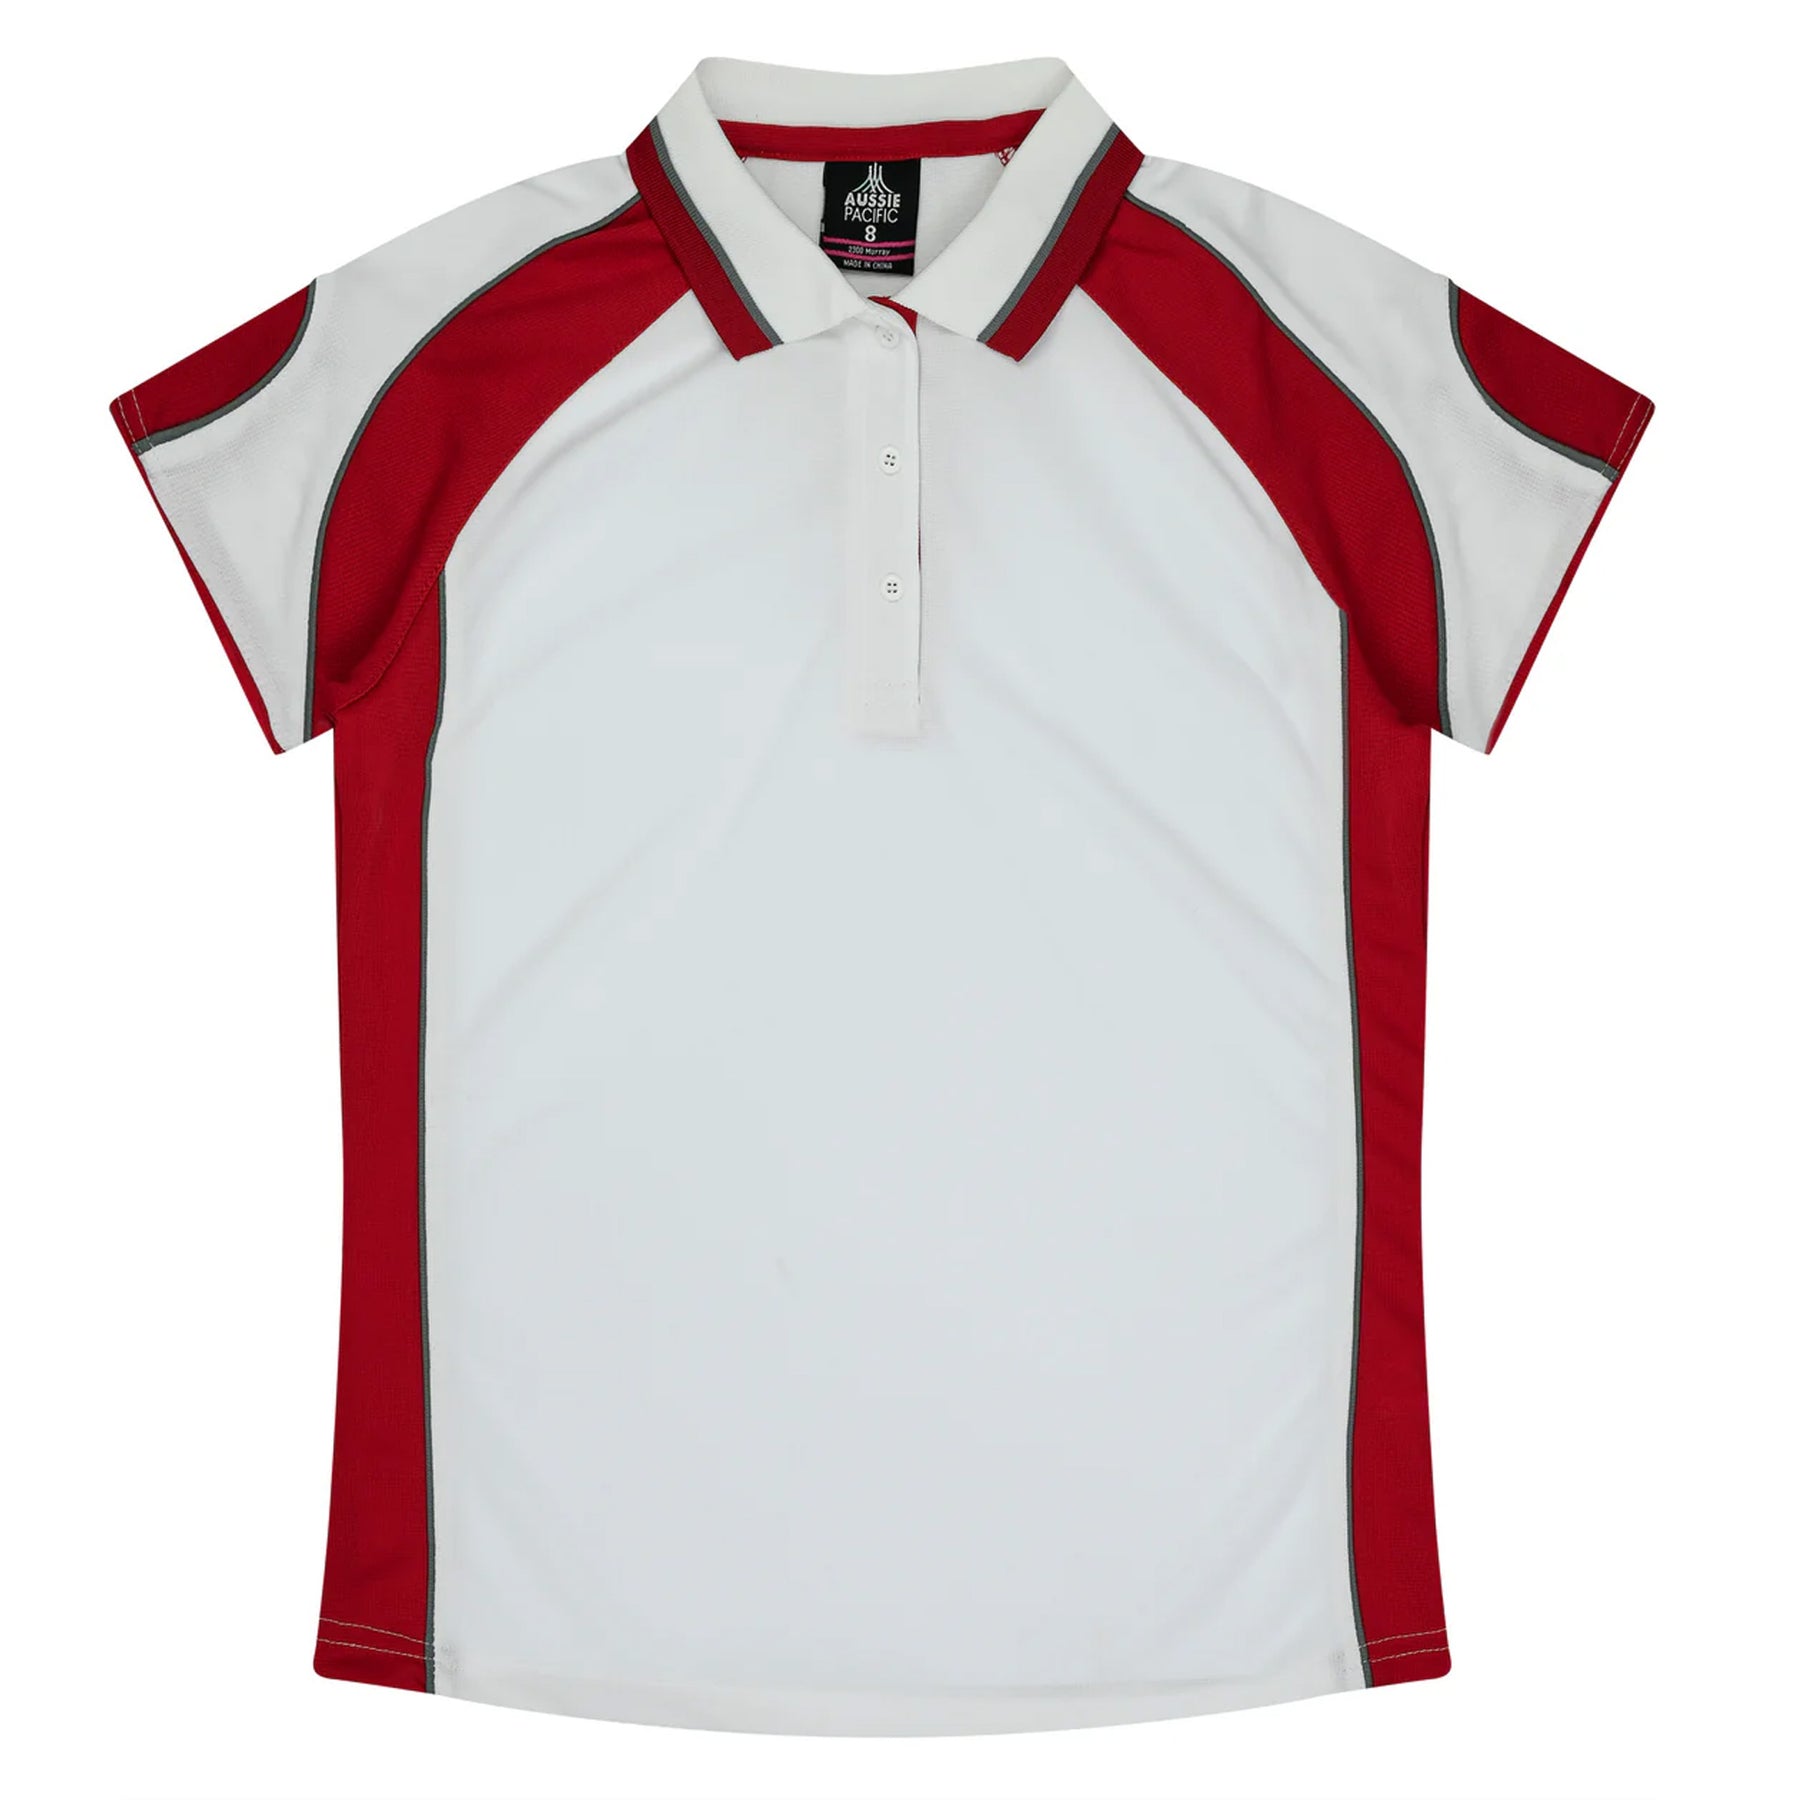 aussie pacific murray ladies polo in white red